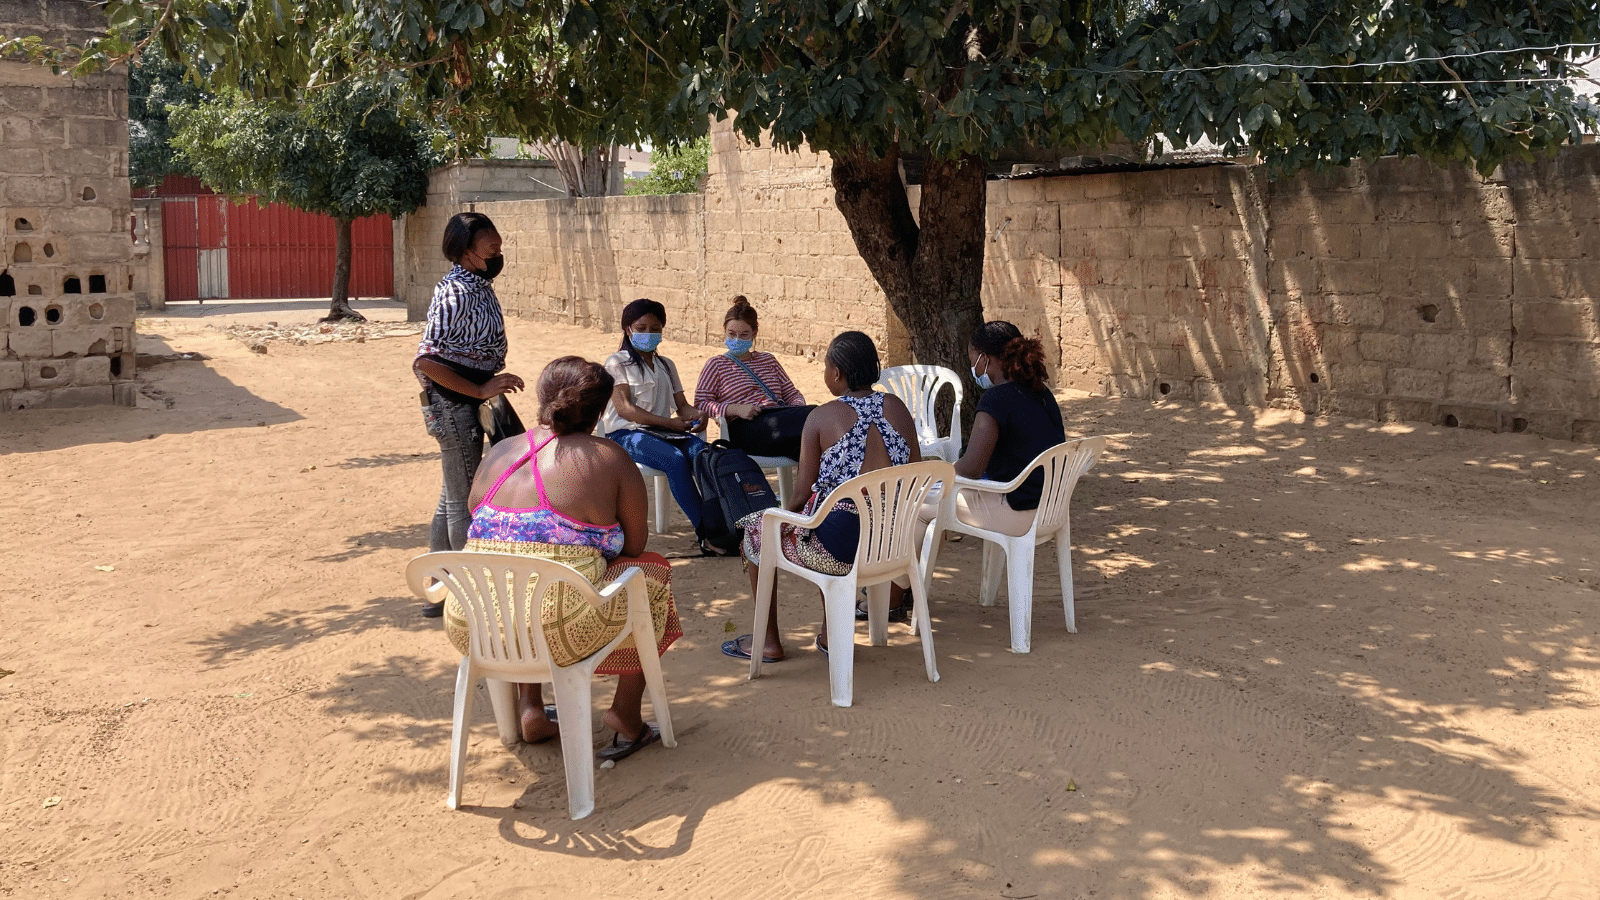 Maria, a young girl living with HIV who has been supported through partners of the Elton John AIDS Foundation, sits with her mum outside of her home speaking to peer educator from the community.